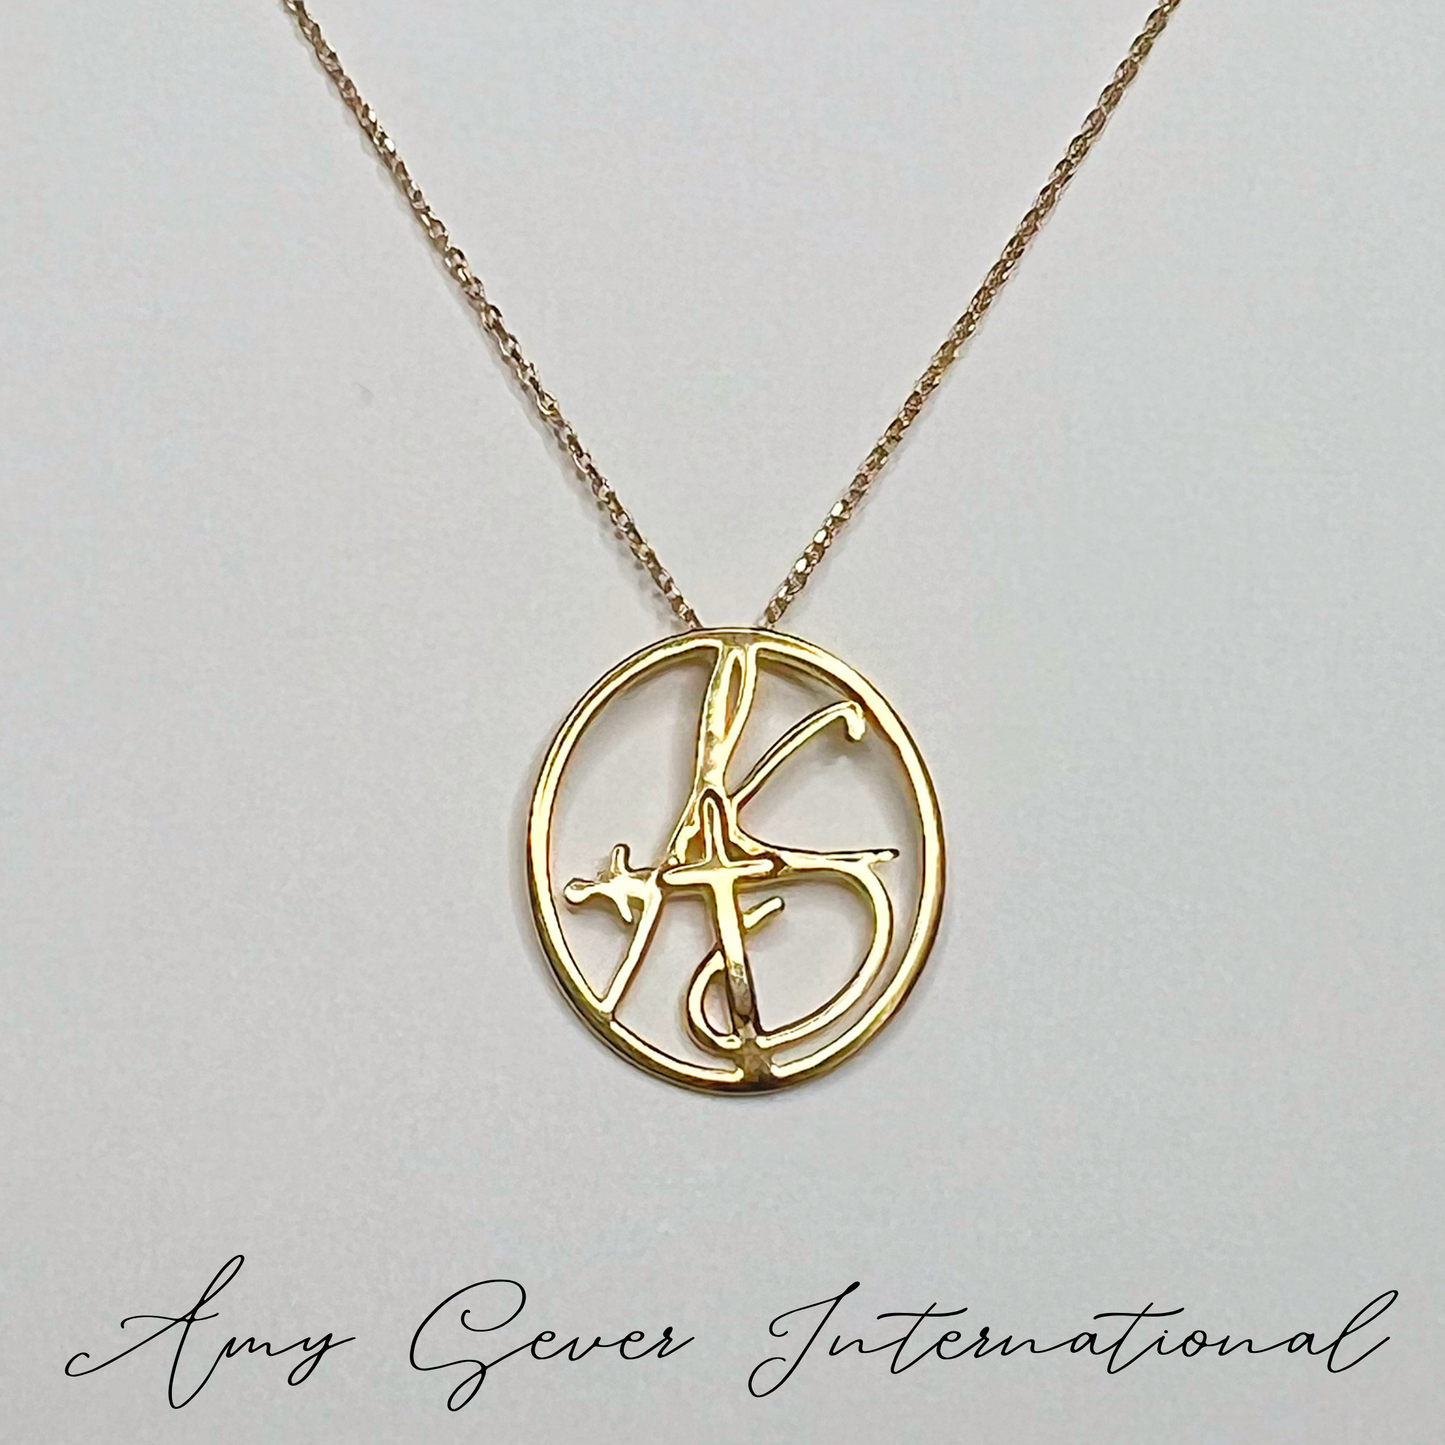 10K Yellow Gold Amulet with 18” Chain